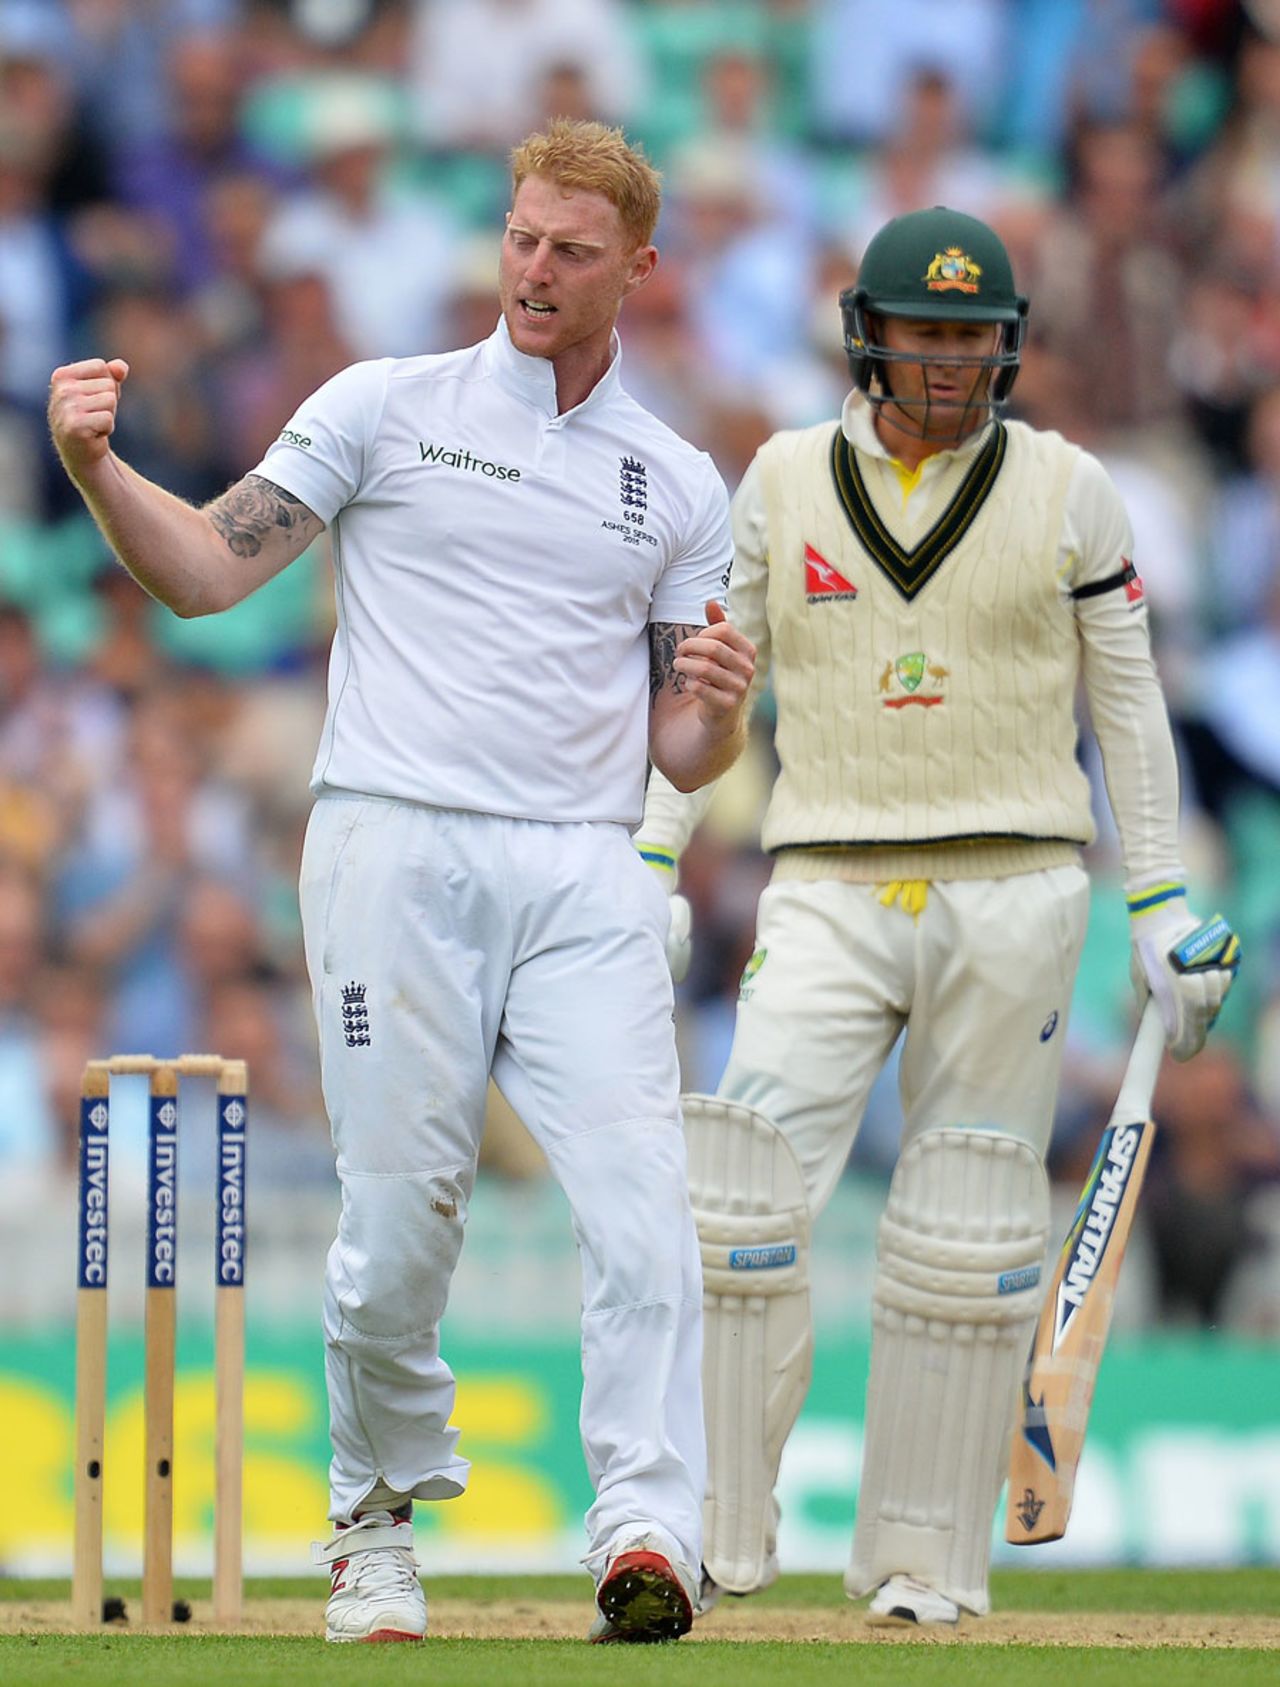 Ben Stokes had Michael Clarke caught behind, England v Australia, 5th Investec Ashes Test, The Oval, August 20, 2015